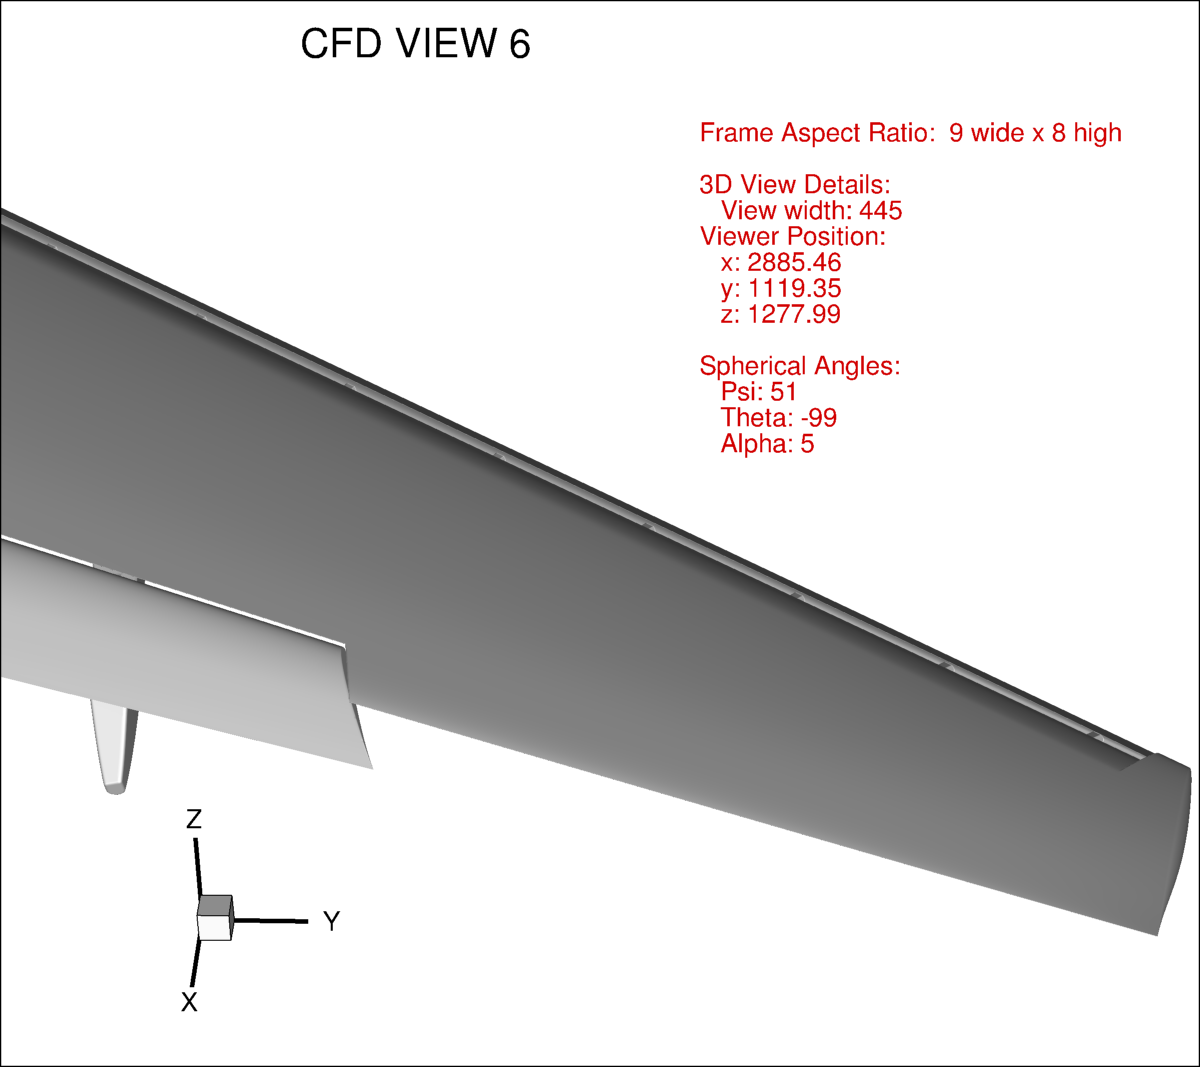 Example CFD view #6